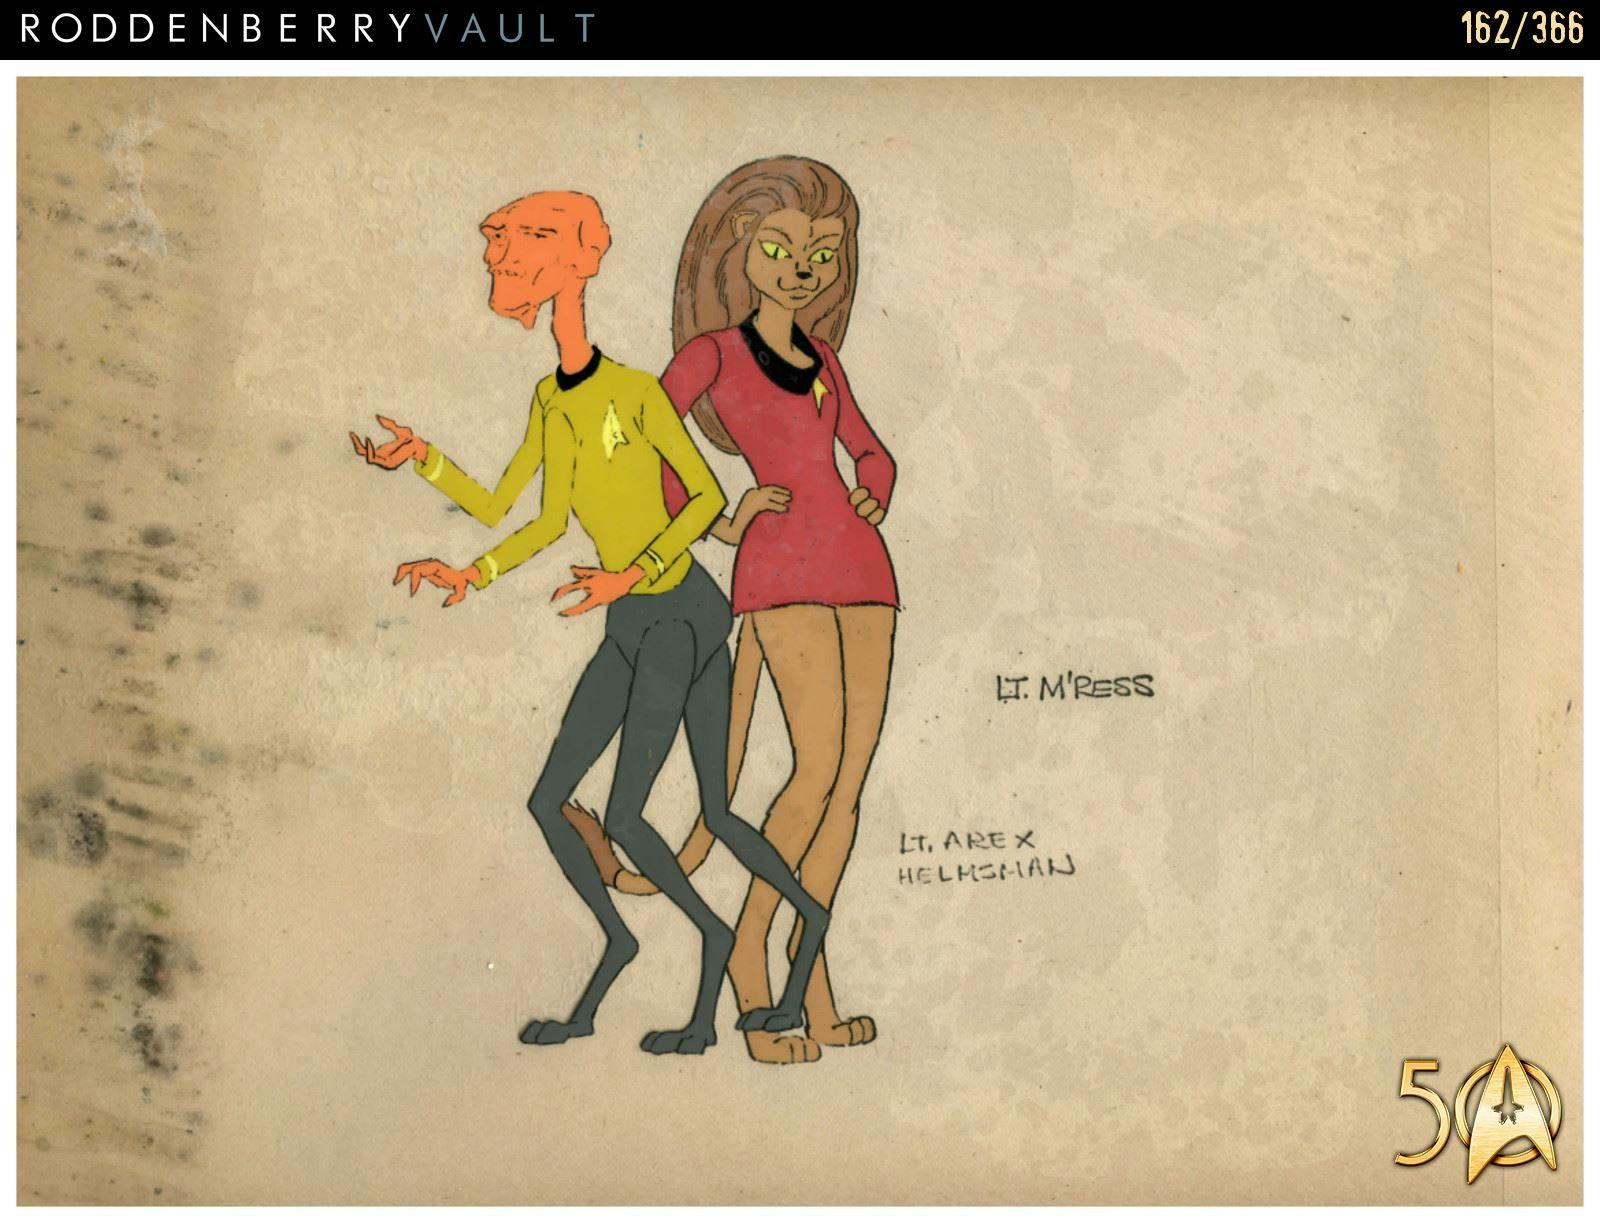 From the Roddenberry 366 Vault - The Animated Series - promotional art of Lt. M'Ress and Lt. Arex helmsman